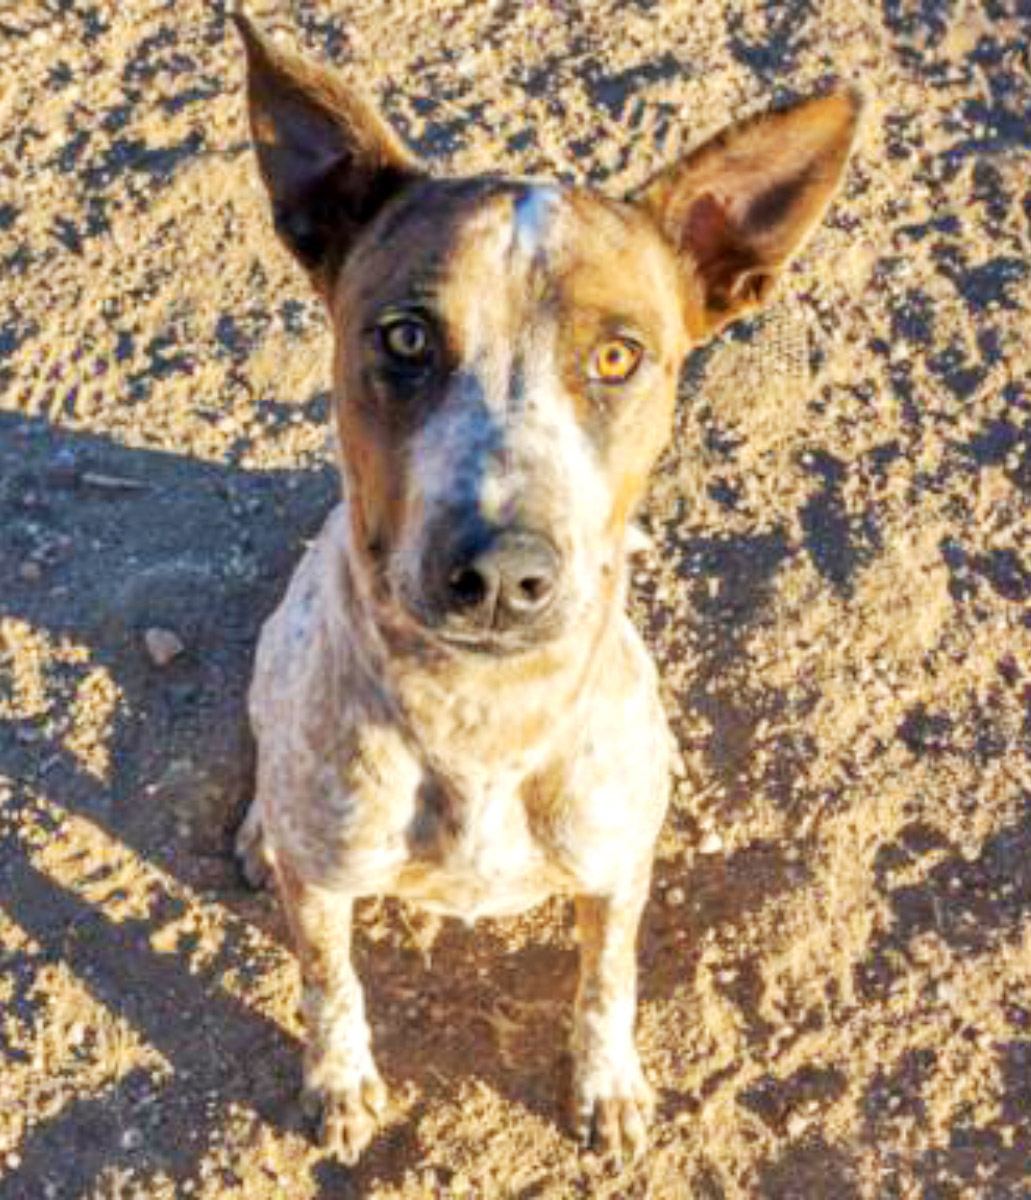 Humane Society – Pet of the Week: My name is Aviator Jones and I’m ready for my new family to walk in the doors! I’m a 2-year-old Australian cattle dog mix that came into HSPPR as stray. I’m a shy guy at first and can be a little slow to open up to new people. But once you gain my trust, I love to show my true energetic personality! I’m looking for an active household that can take me outside every day to play with me and let me run off my energy. My adoption is $250, and I come with a voucher for a veterinary exam, vaccinations, 30 days of pet health insurance and a microchip, and I am already neutered. Just ask for Aviator Jones (1616801). Humane Society: 719-473-1741, 610 Abbot Lane. Call for hours. www.hsppr.org.